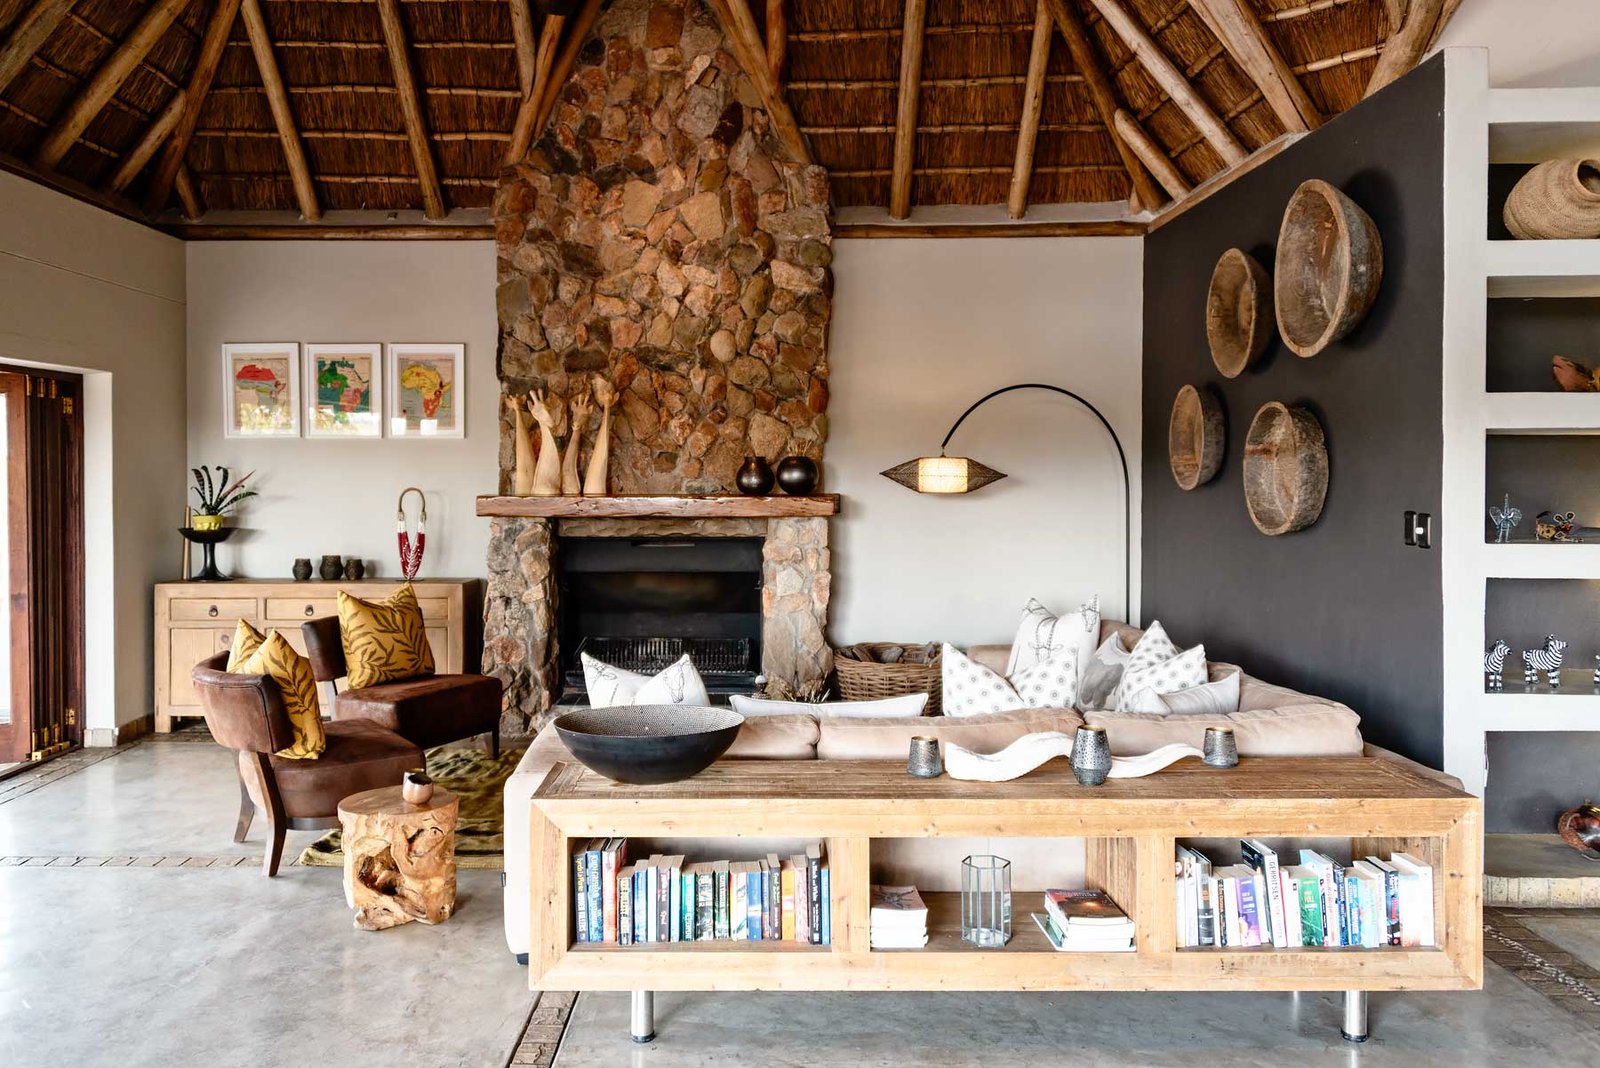 Lounge area at Klaserie Sands River Camp - - Check out my review of staying at Klaserie Sands River Camp, a beautiful boutique (4 suites), luxury safari lodge in Greater Kruger (Big 5), South Africa